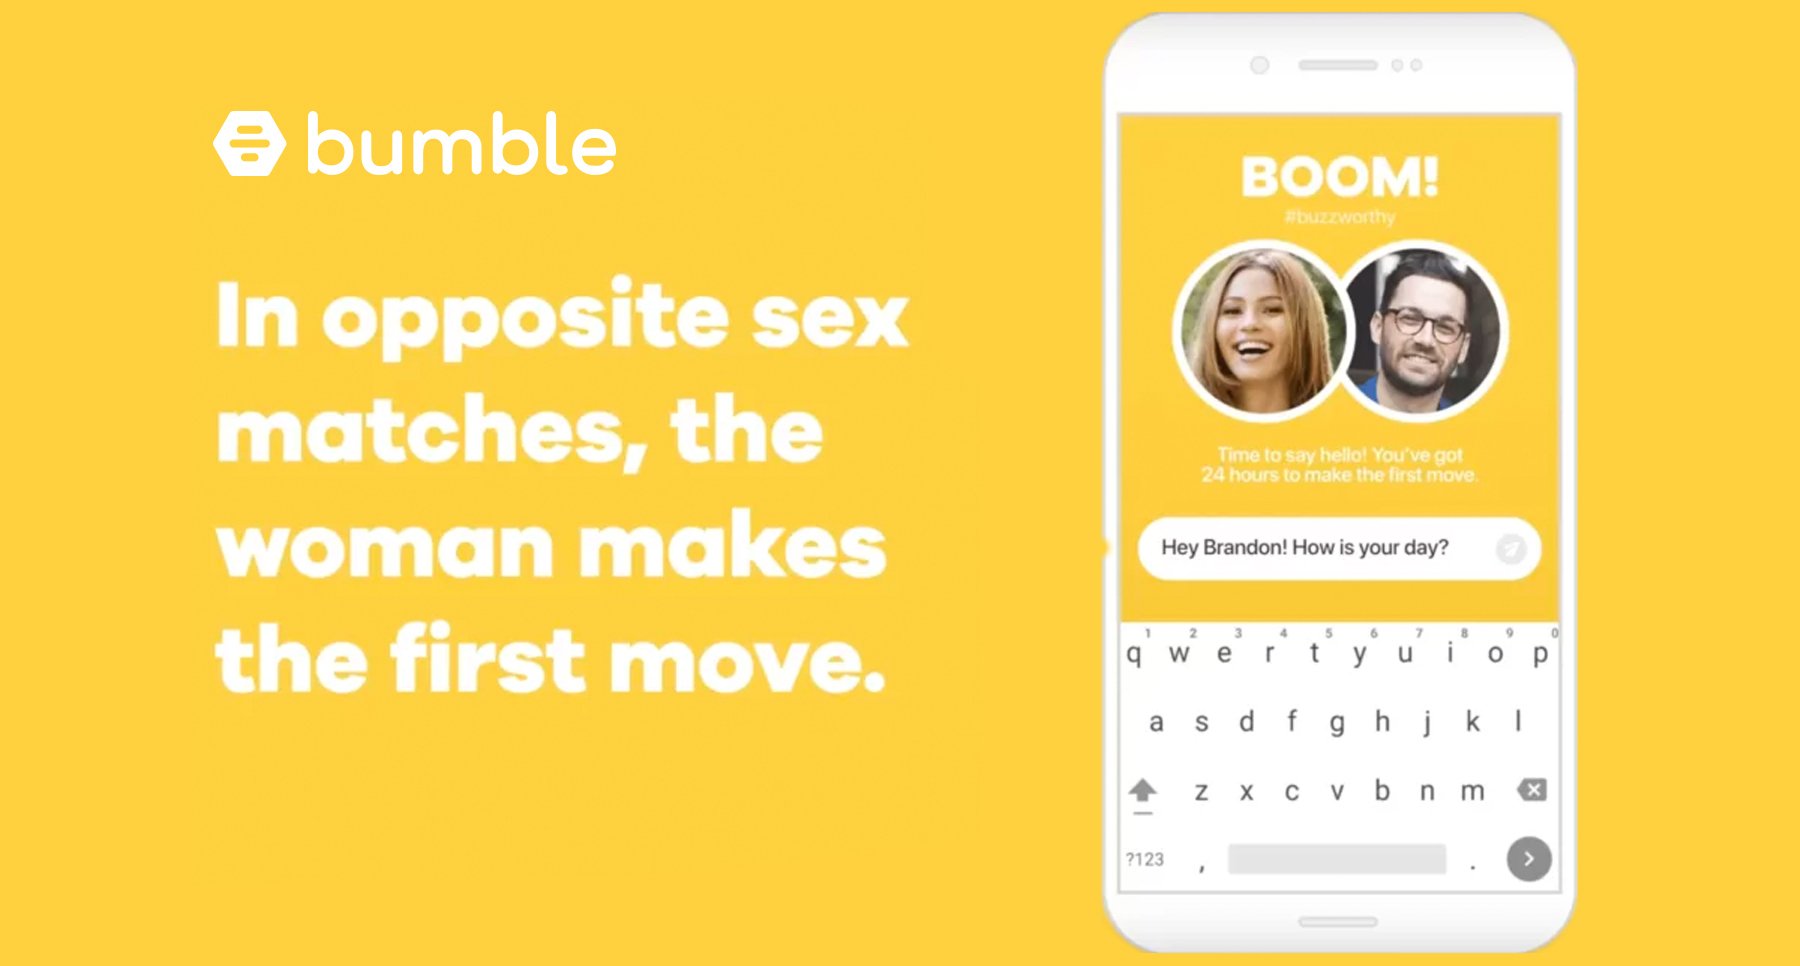 Online dating brand Bumble reassures user protection